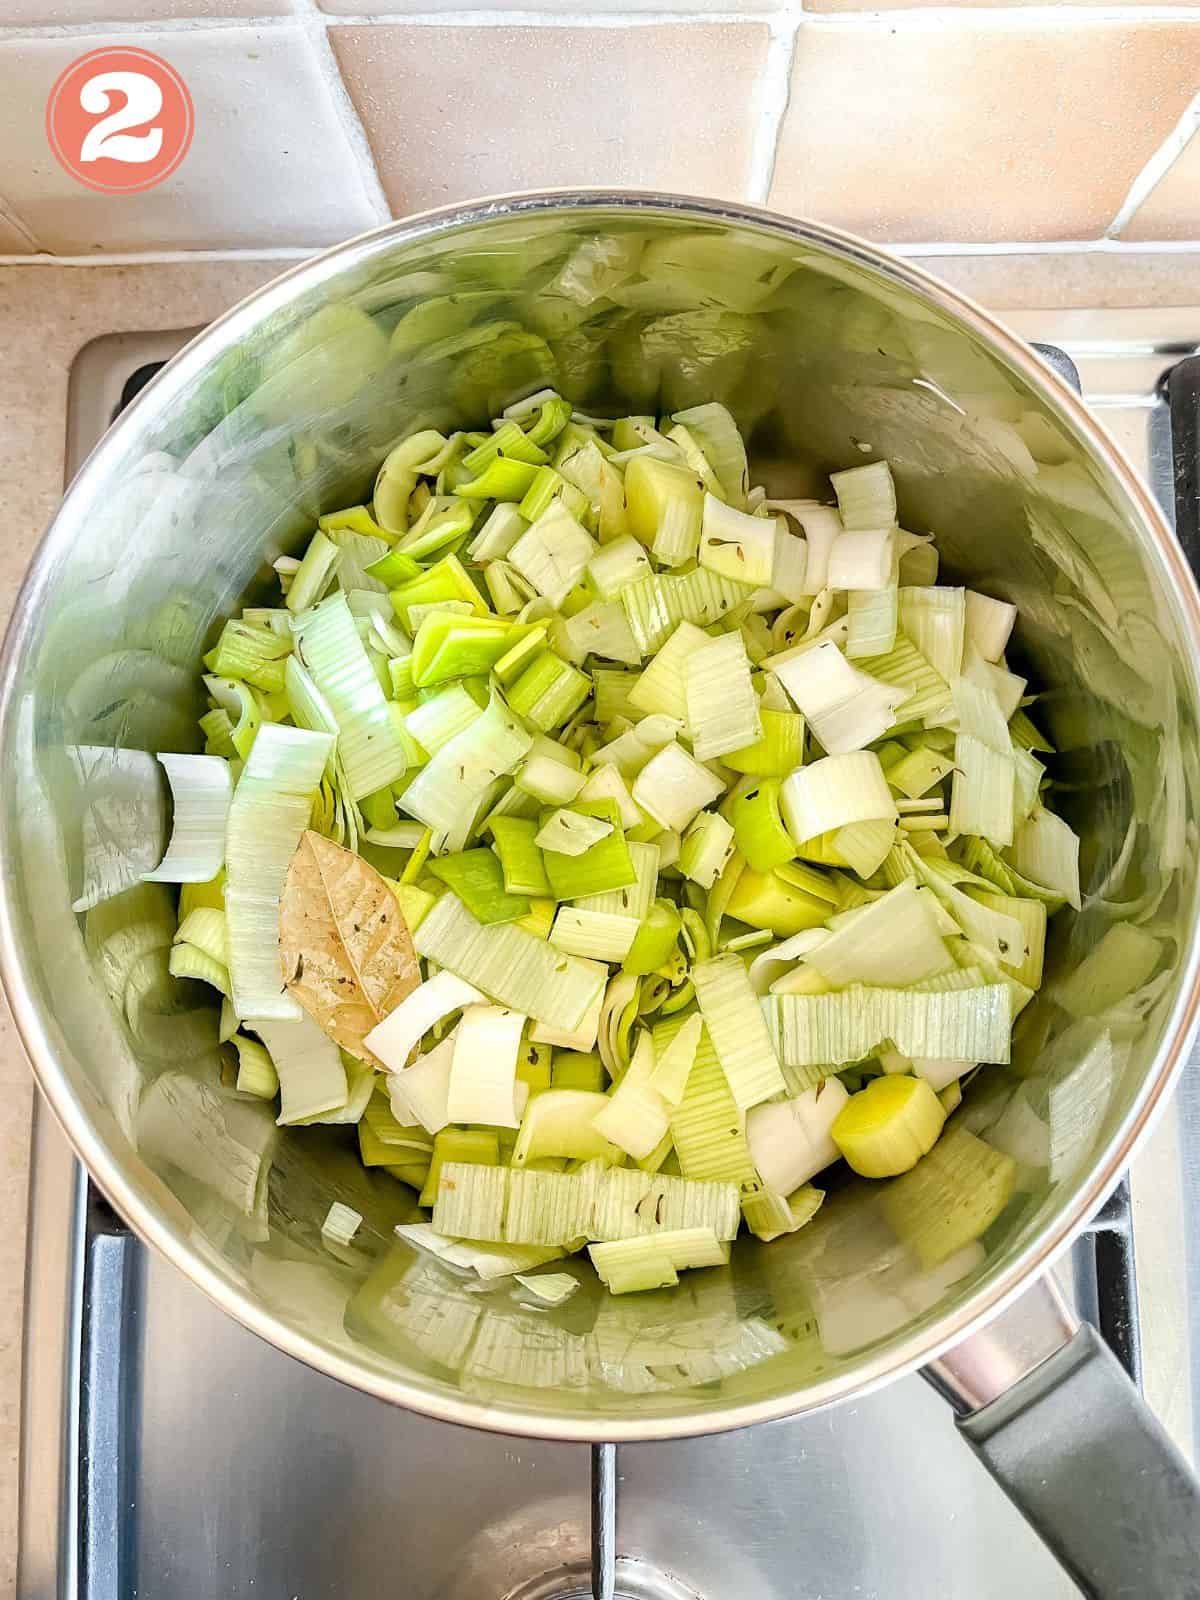 celery, leek and a bay leaf in a large pot labelled number two.